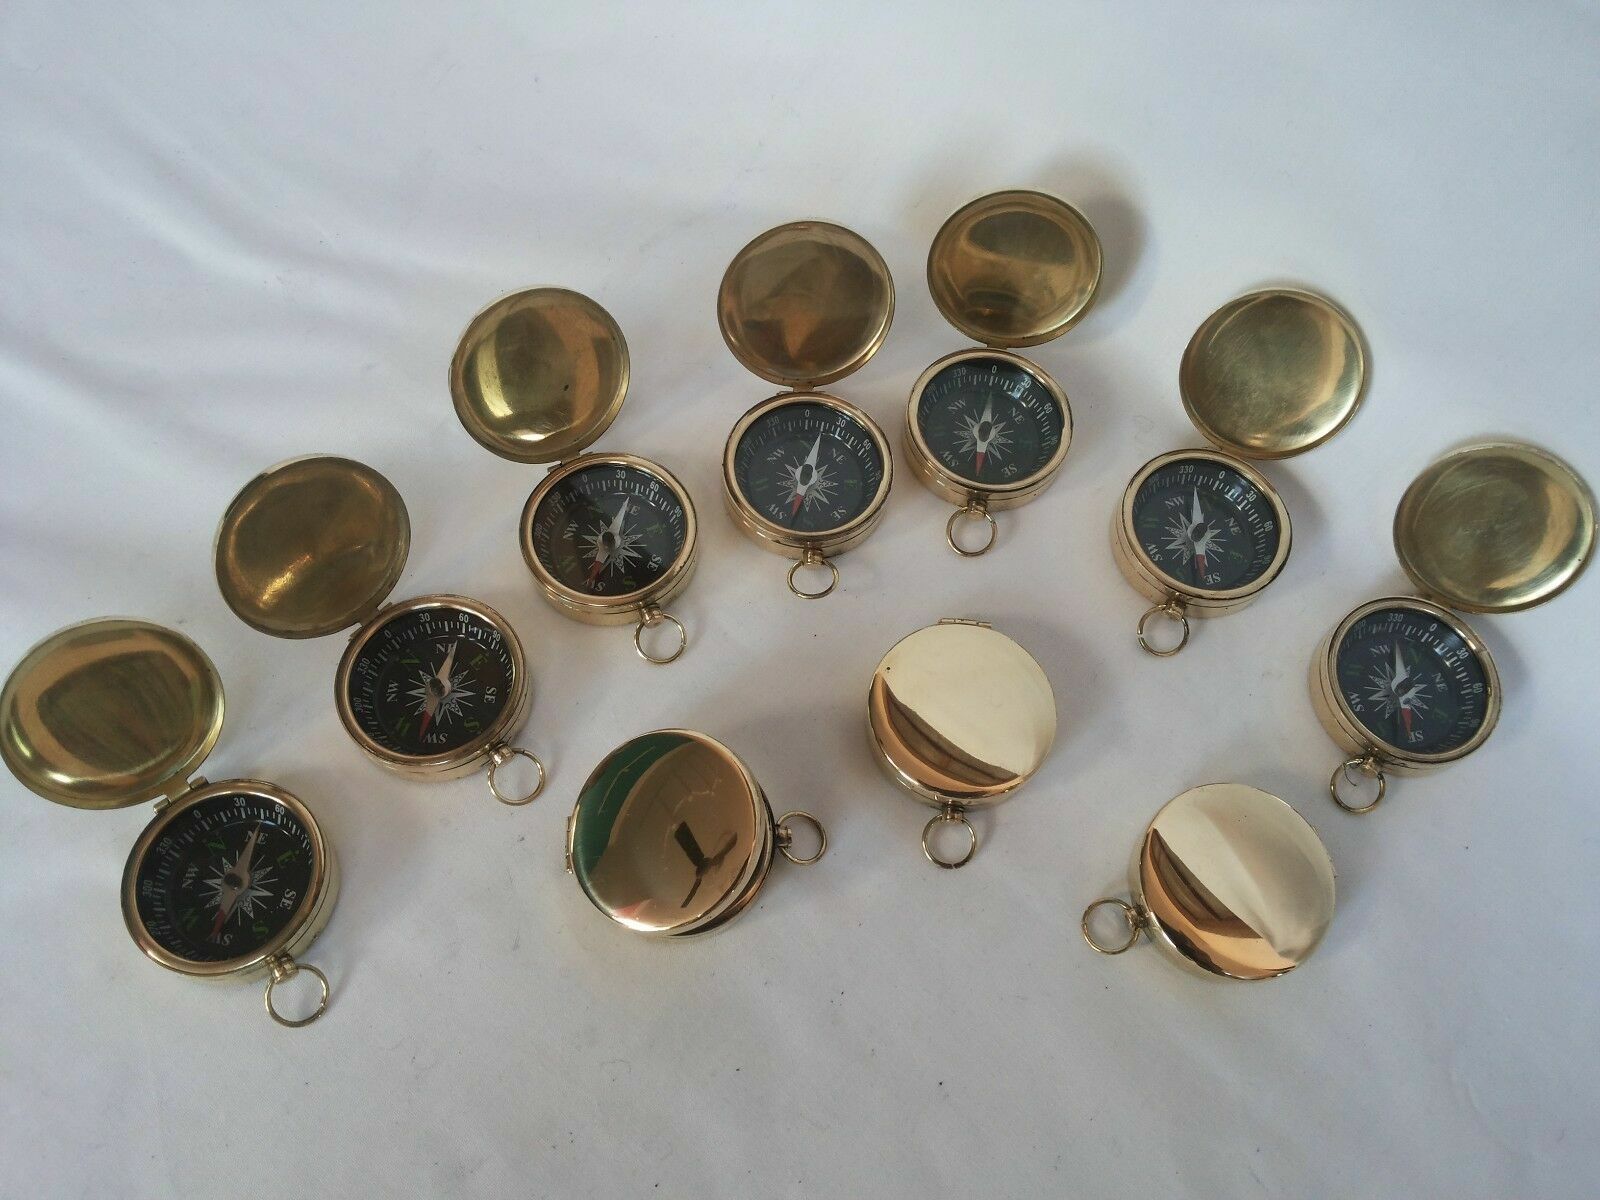 Brass Vintage Lid Compass 45mm Lot Of 10 Pcs Marine Collectible Decorative GIFTS Без бренда